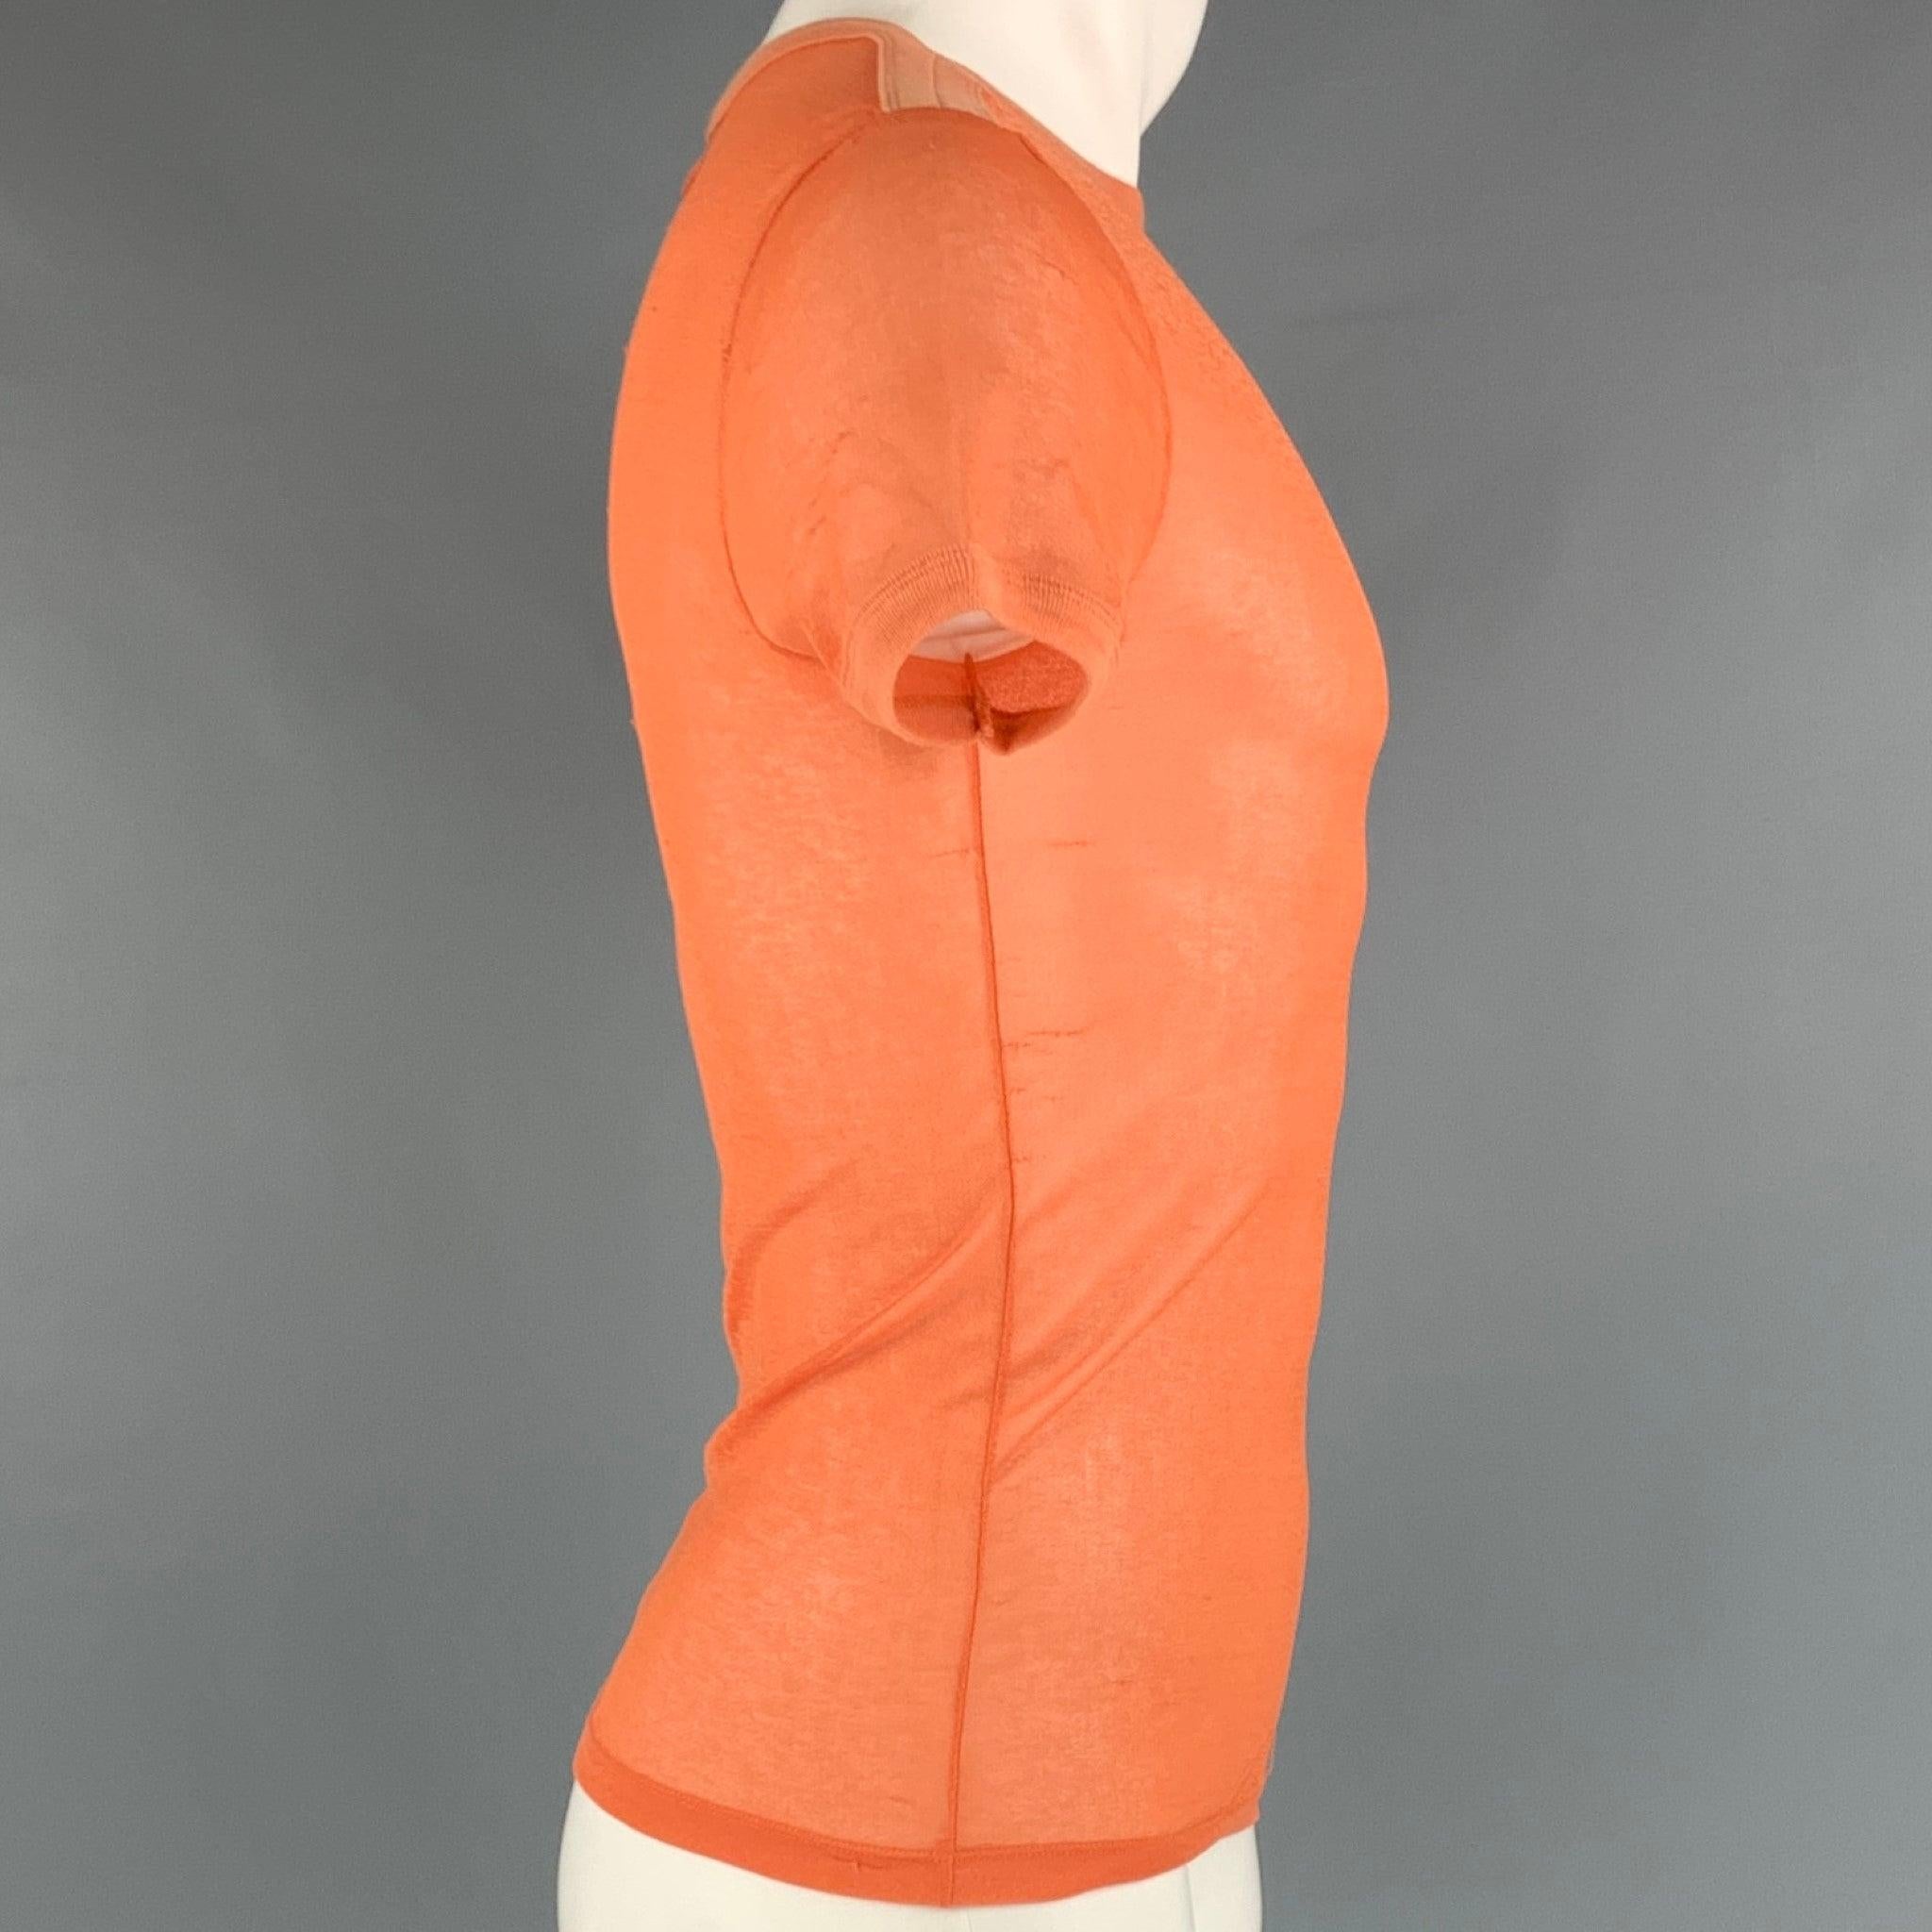 JEAN PAUL GAULTIER T-shirt in an orange polyester fabric featuring a sheer style and short sleeves. Made in Italy.
Good Pre-Owned Condition. Moderate signs of wear, please check photos. 

Marked:   size not marked
 

Measurements: 
 
Shoulder: 15.5